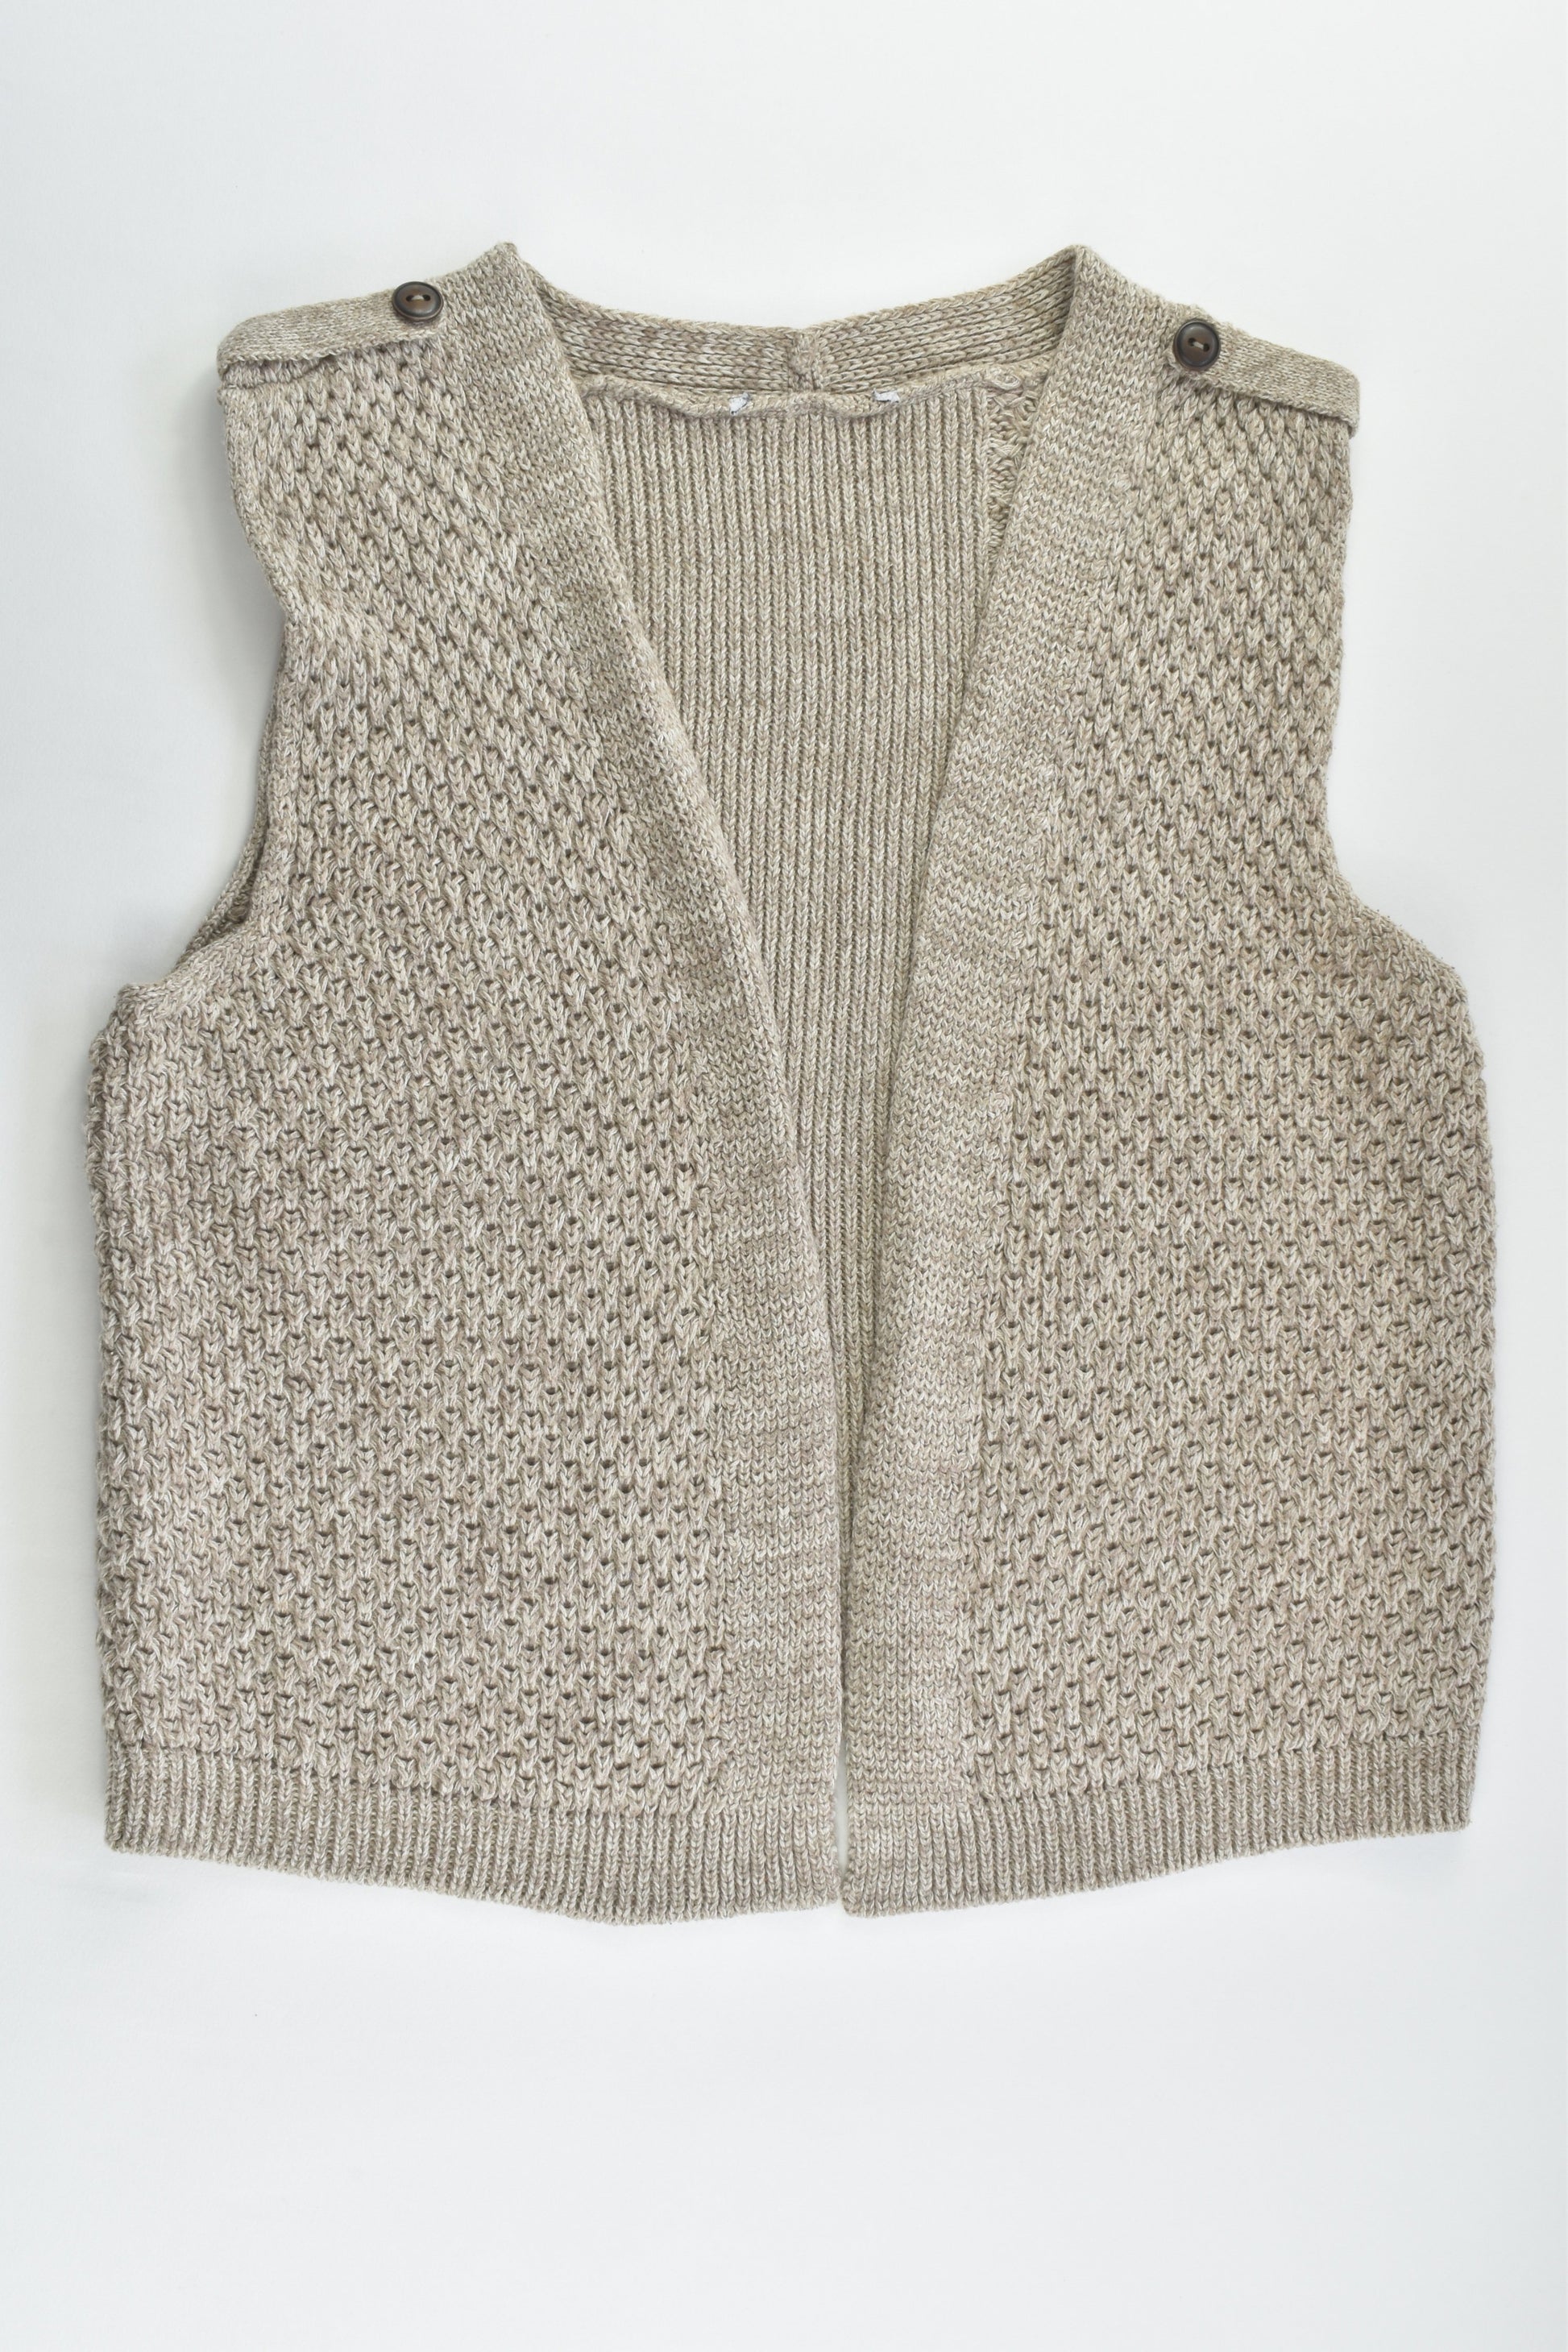 Brand Unknown Size approx 10-12 Knitted Vest